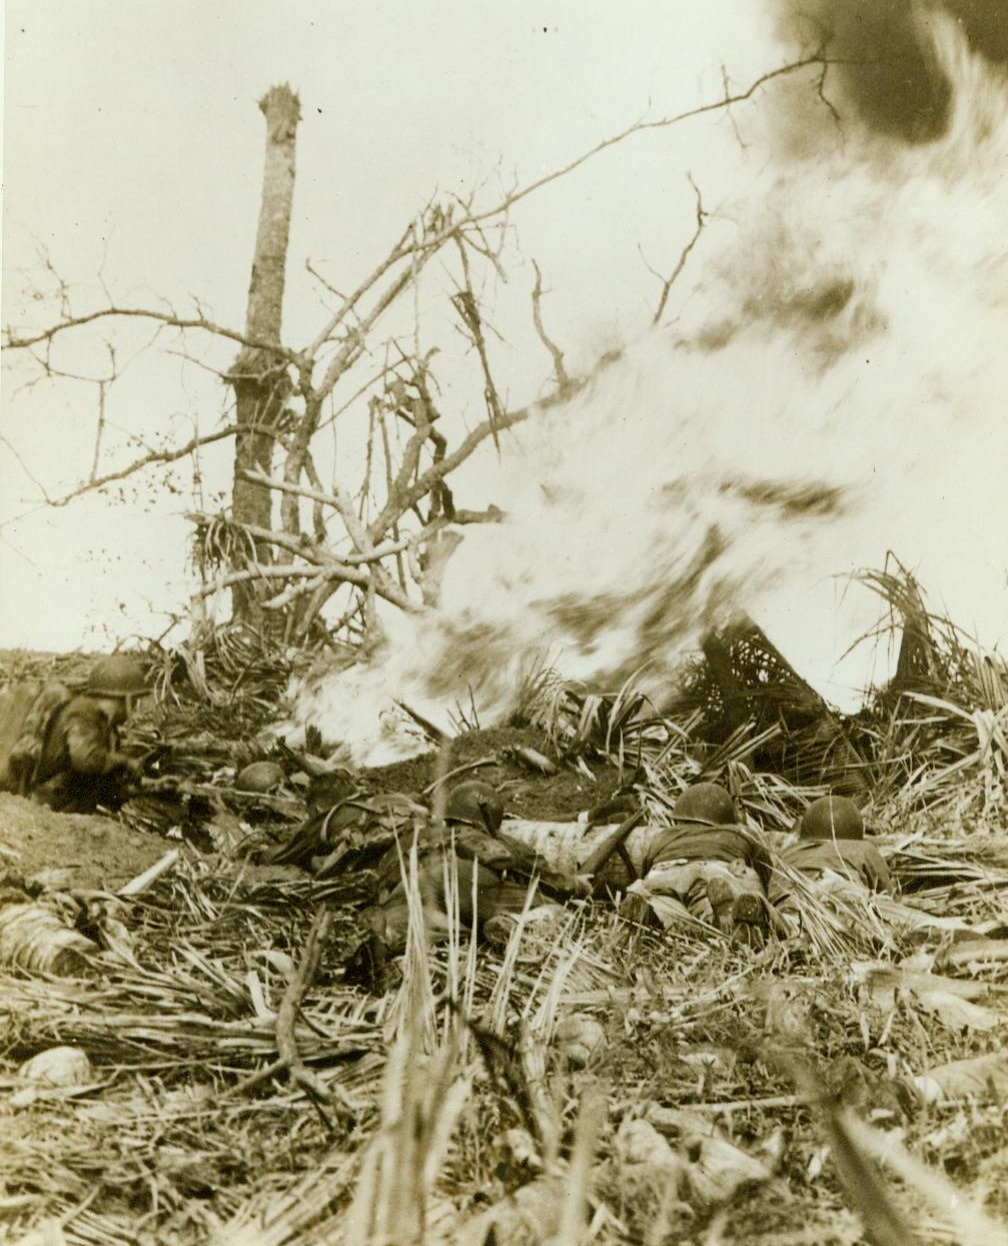 Burn Japs Out of Hiding, 8/2/1944. Guam-- While a Marine (Left) uses a flame thrower to burn the enemy out of a hidden pillbox on Guam, his buddies wait with guns poised for the Japs to show themselves. Although surrounded by leathernecks, the Japs refused to Surrender. (ACME);